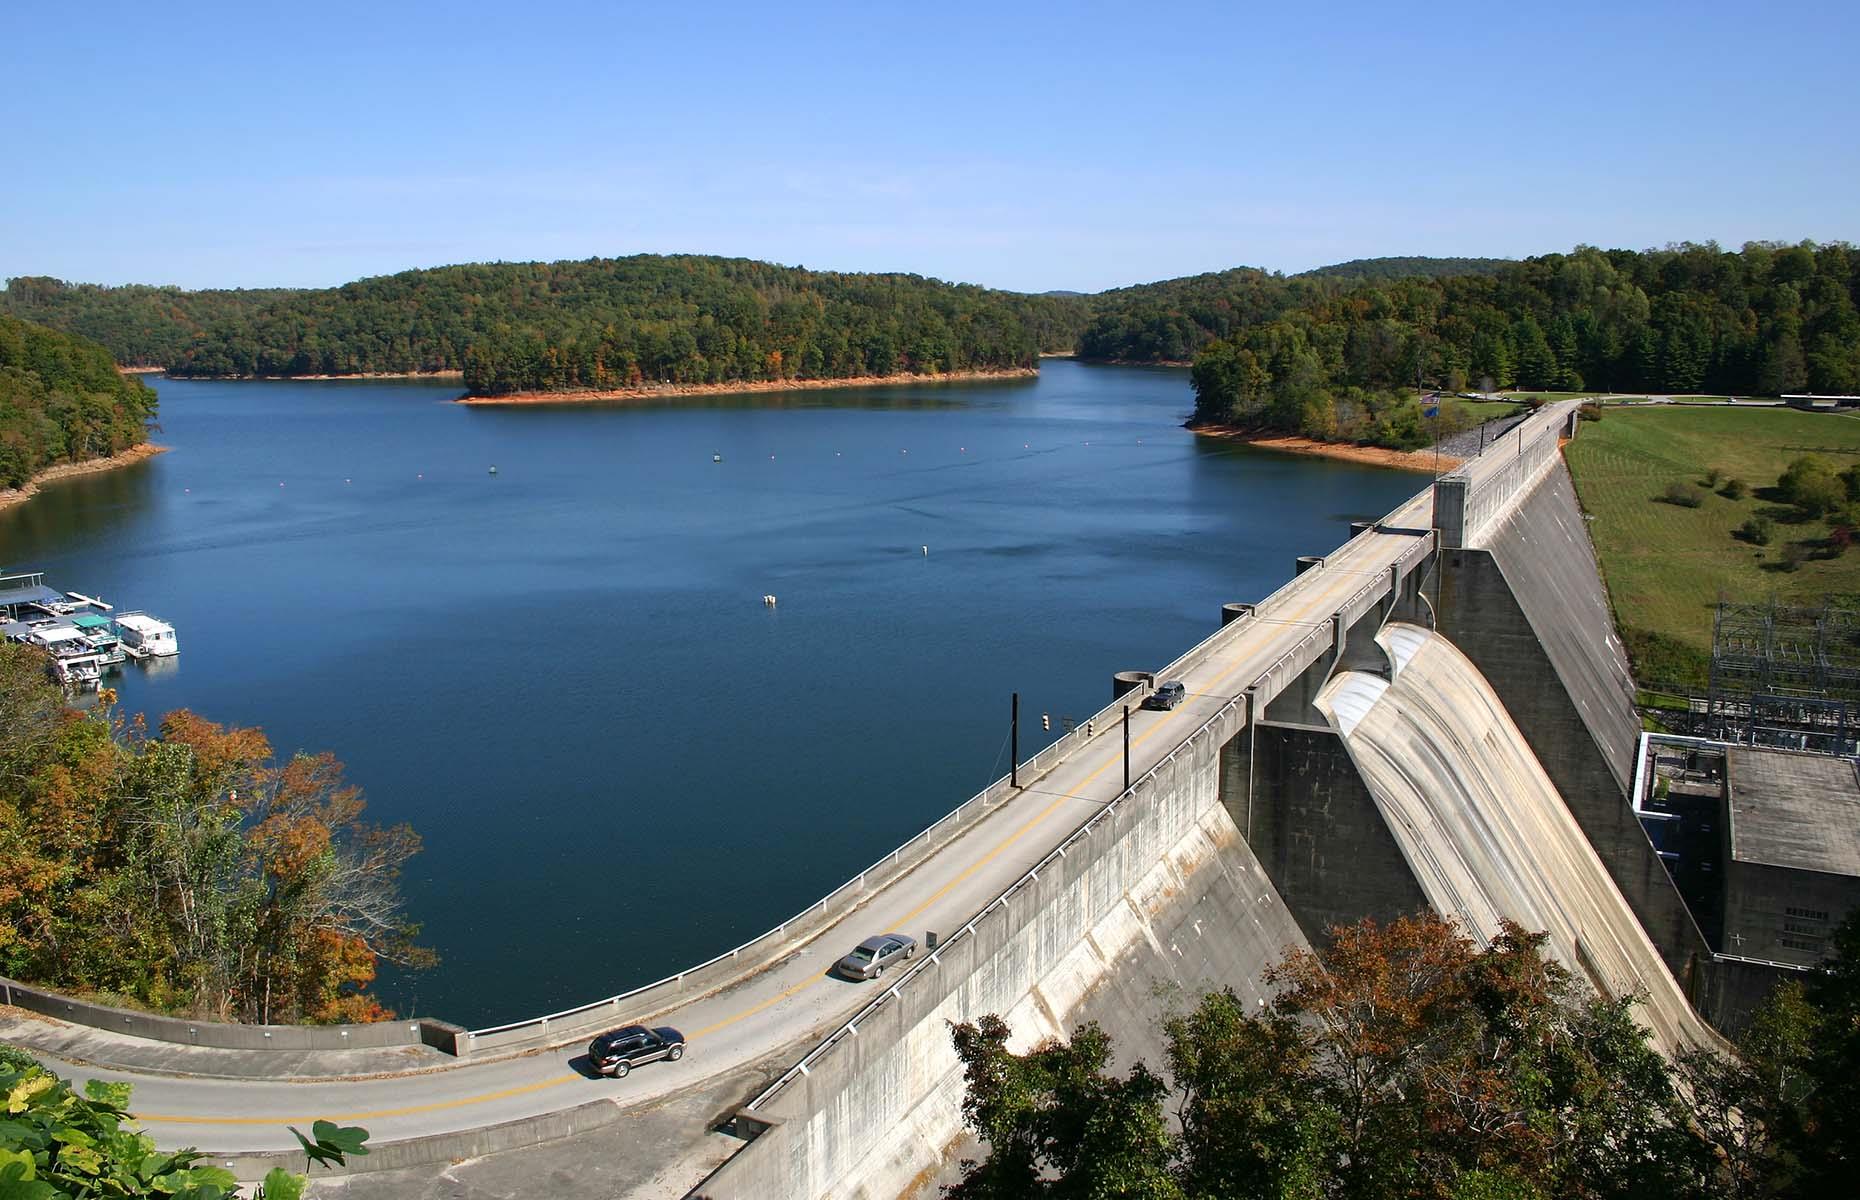 <p>Recognized for its historic significance as the route to Norris Dam (pictured), the Tennessee Valley Authority's first hydroelectric project in the 1930s, the Norris Freeway is a lot more than just an access road. Running from Rocky Top to the dam, the road offers opportunities for multiple outdoor pursuits in the Norris Dam State Park, including hiking, trout fishing and boating.</p>  <p><a href="https://www.loveexploring.com/gallerylist/65669/unusual-things-youll-find-on-a-road-trip-through-the-usa"><strong>Check out these unusual things you'll find on an American road trip</strong></a></p>